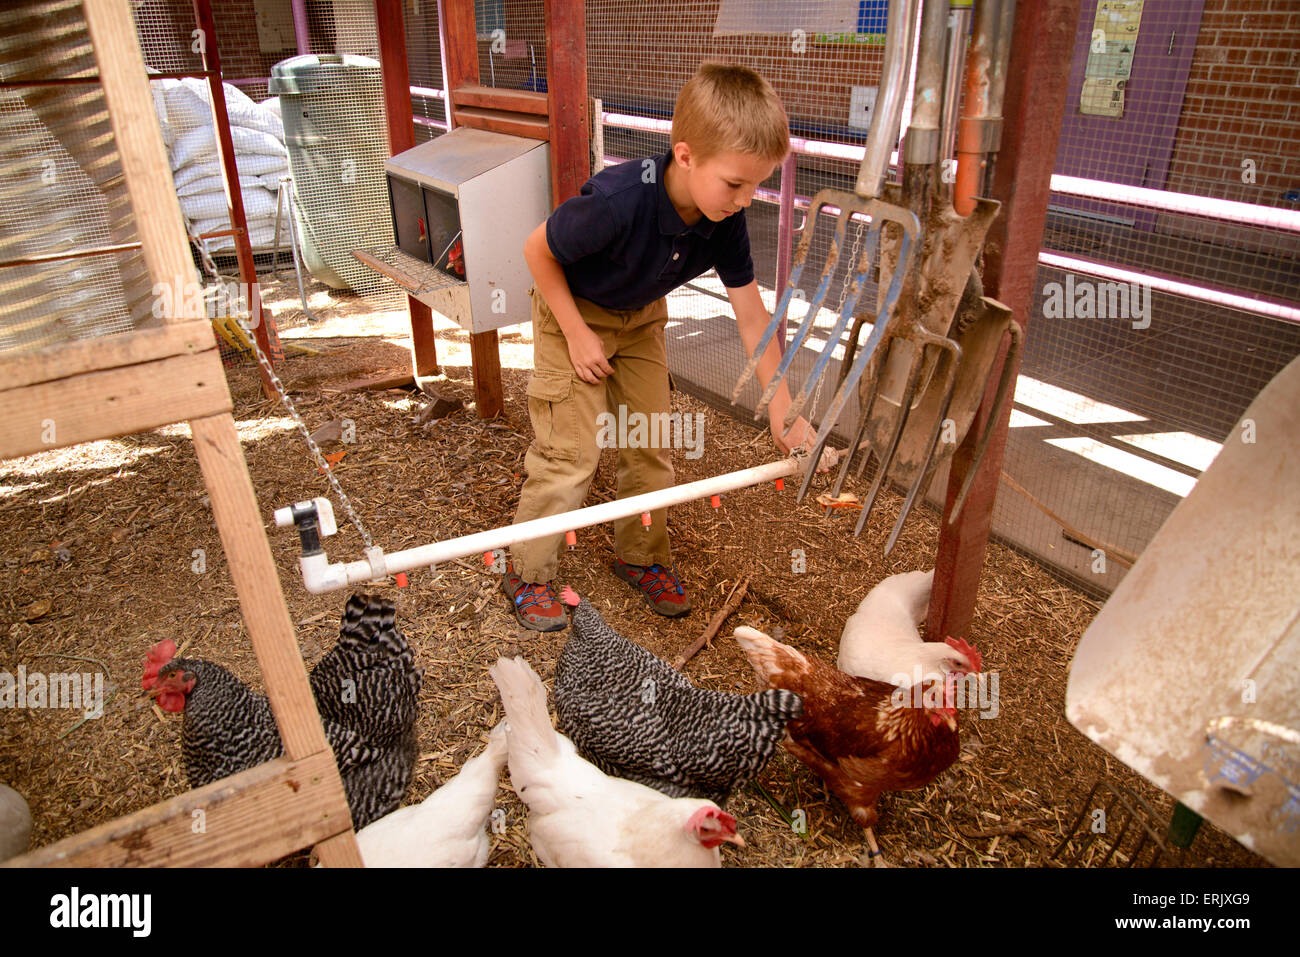 Manzo Elementary School students collect eggs from the chickens in the school's organic garden, Tucson, Arizona, USA. Stock Photo